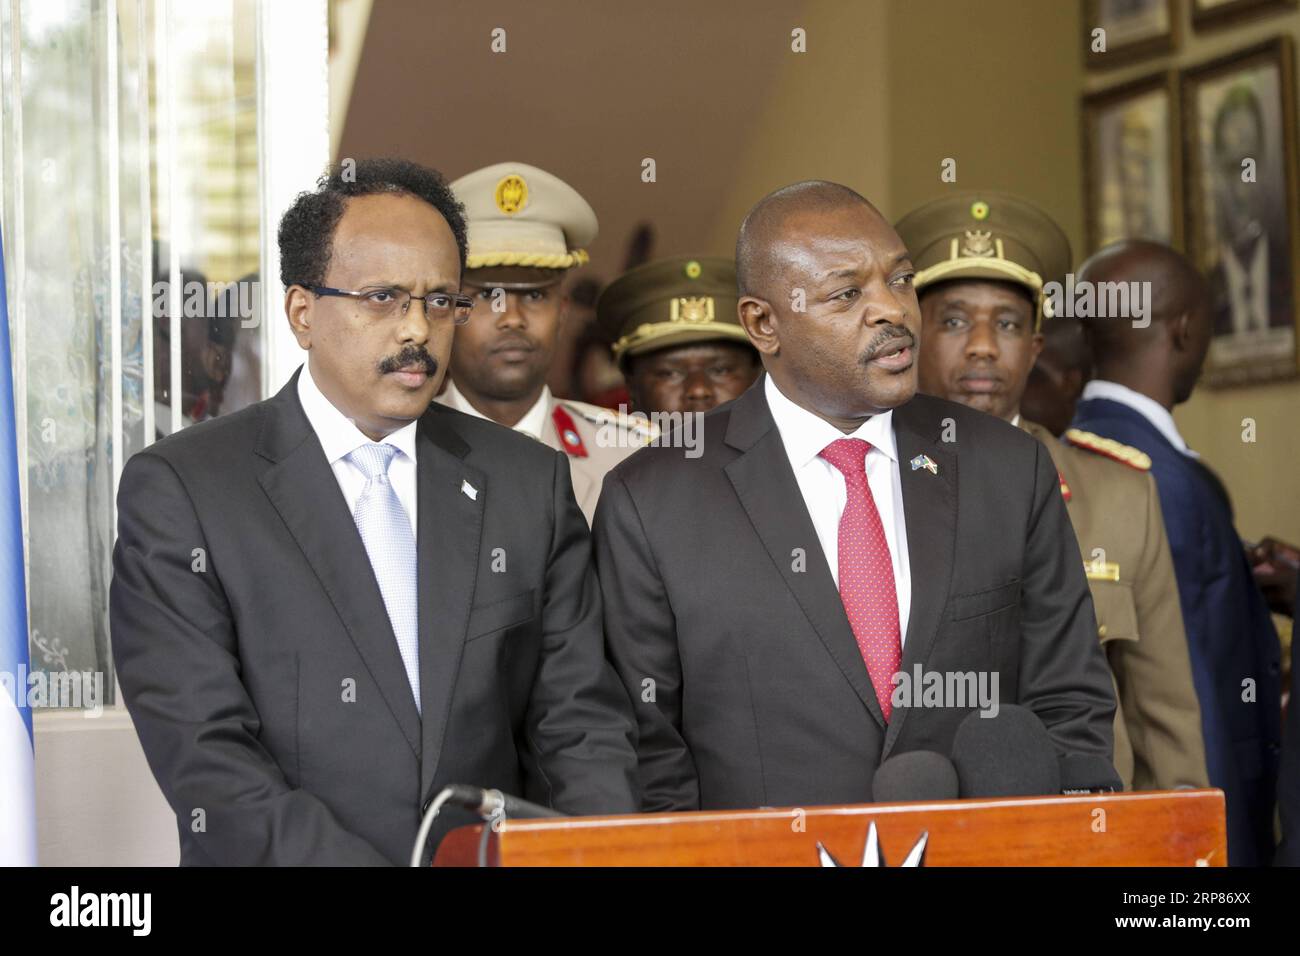 (190220) -- BUJUMBURA, Feb. 20, 2019 (Xinhua) -- Burundian President Pierre Nkurunziza (R) speaks at a joint press conference with visiting Somali President Mohamed Abdullahi Mohamed in Bujumbura, commercial capital of Burundi, Feb. 19, 2019. Nkurunziza on Tuesday disapproved the decision of the African Union (AU) to withdraw 1,000 Burundian peacekeepers from Somalia. The AU Peace and Security Council decided in December that Burundi should start the pullout of 1,000 Burundian troops of AU Mission in Somalia (AMISOM) before the end of February 2019, as part of reduction in AU troops in Somalia Stock Photo